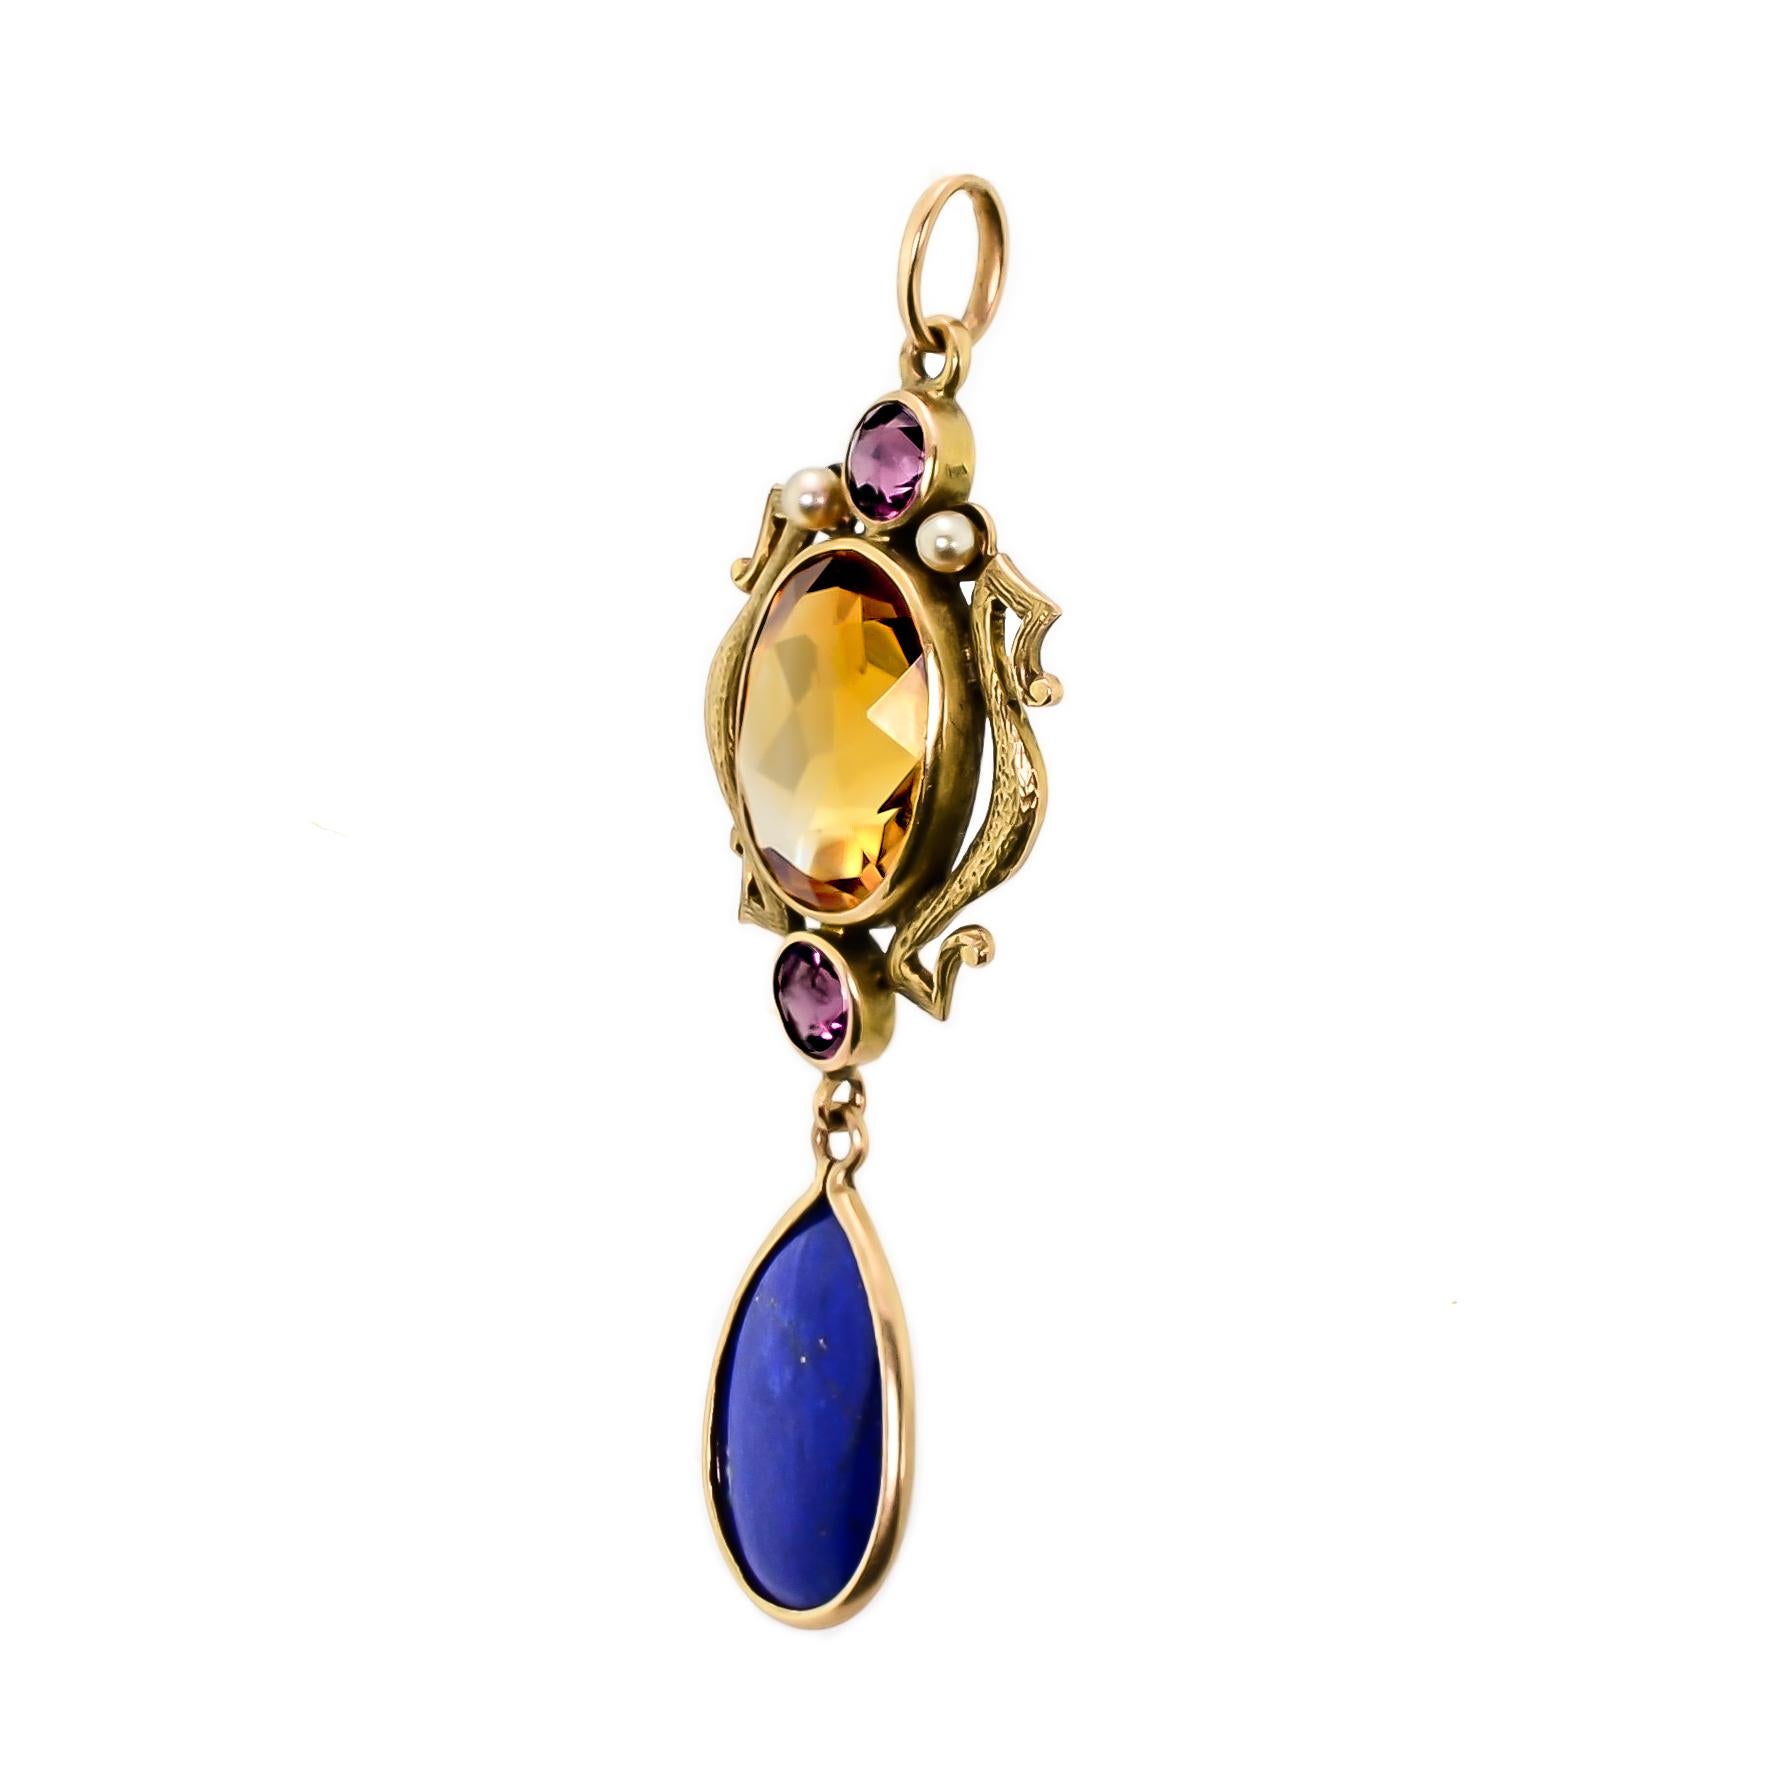 This lovely turn-of-the-century citrine, ruby, and seed pearl 14kt yellow gold pendant from early years of the twentieth century is a beautiful example of the mystical, soft, curvaceous design that defines the Art Nouveau movement. One (1) dazzling